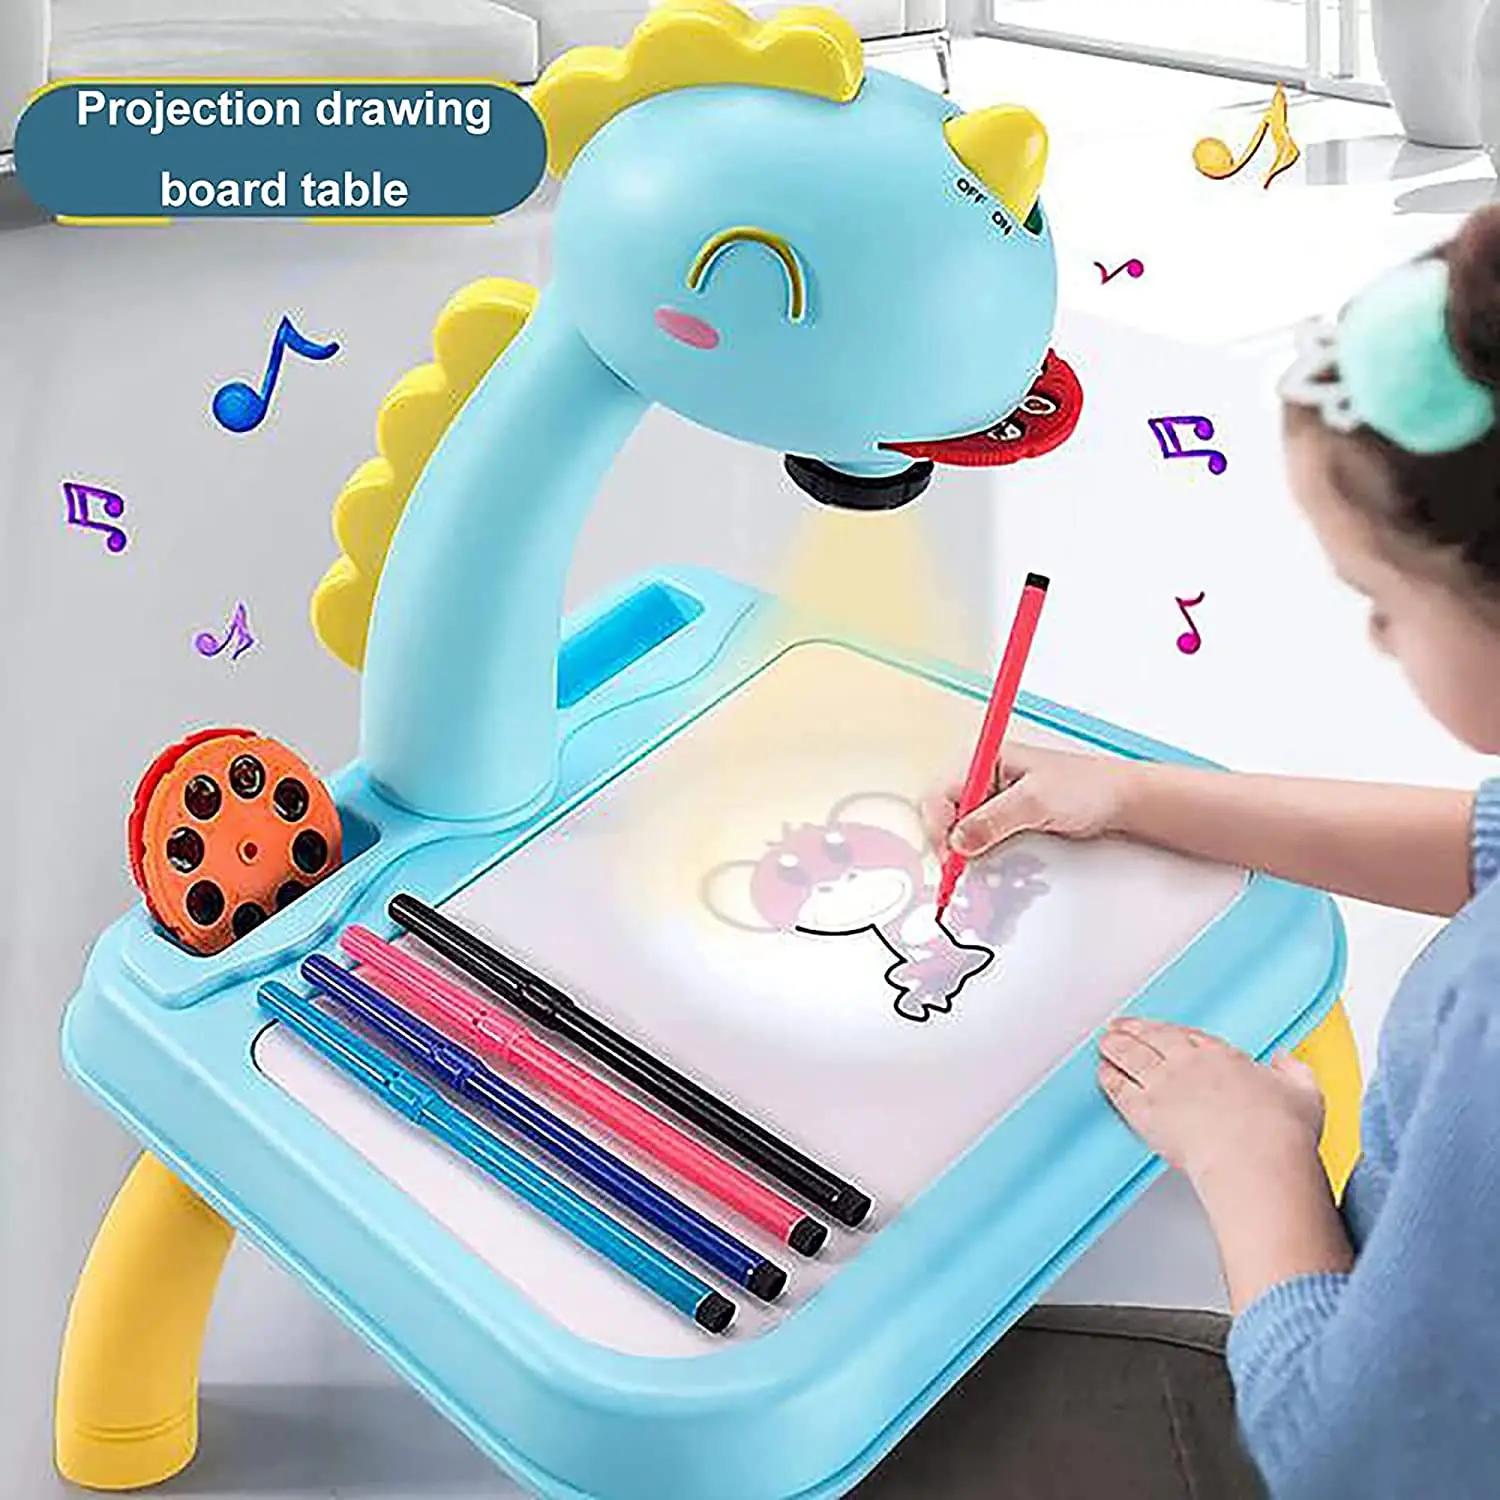 Drawing Projector Table for Kids Trace and Draw Projector Toy Child Smart  Projector Sketcher Desk Learning Painting Machine Girl - AliExpress